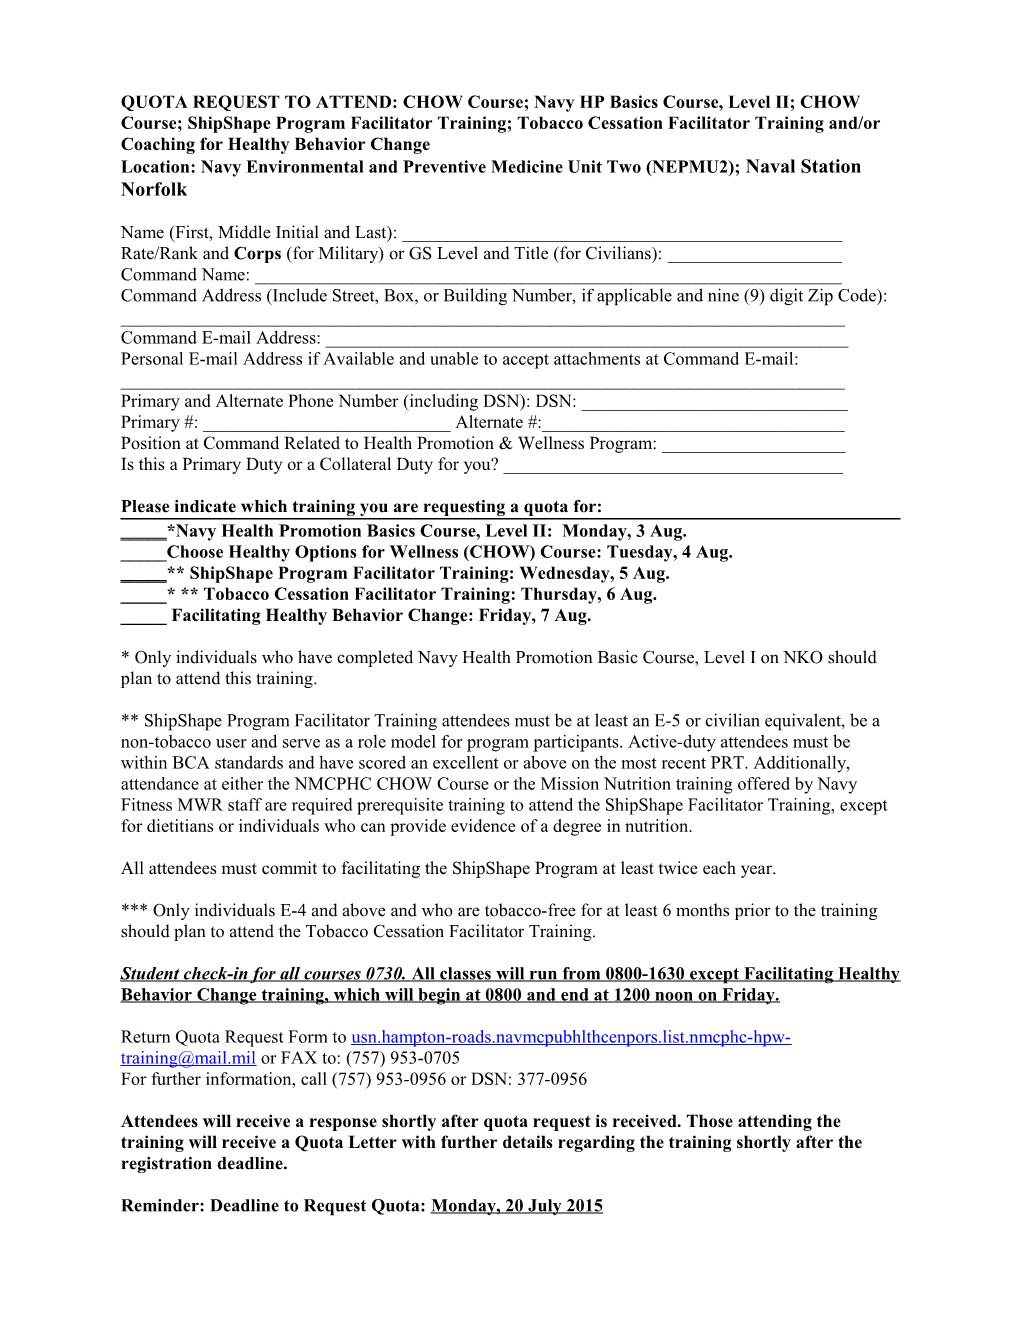 Quota Request to Attend Navy Health Promotion and Wellness Course, And/Or Shipshape Facilitator